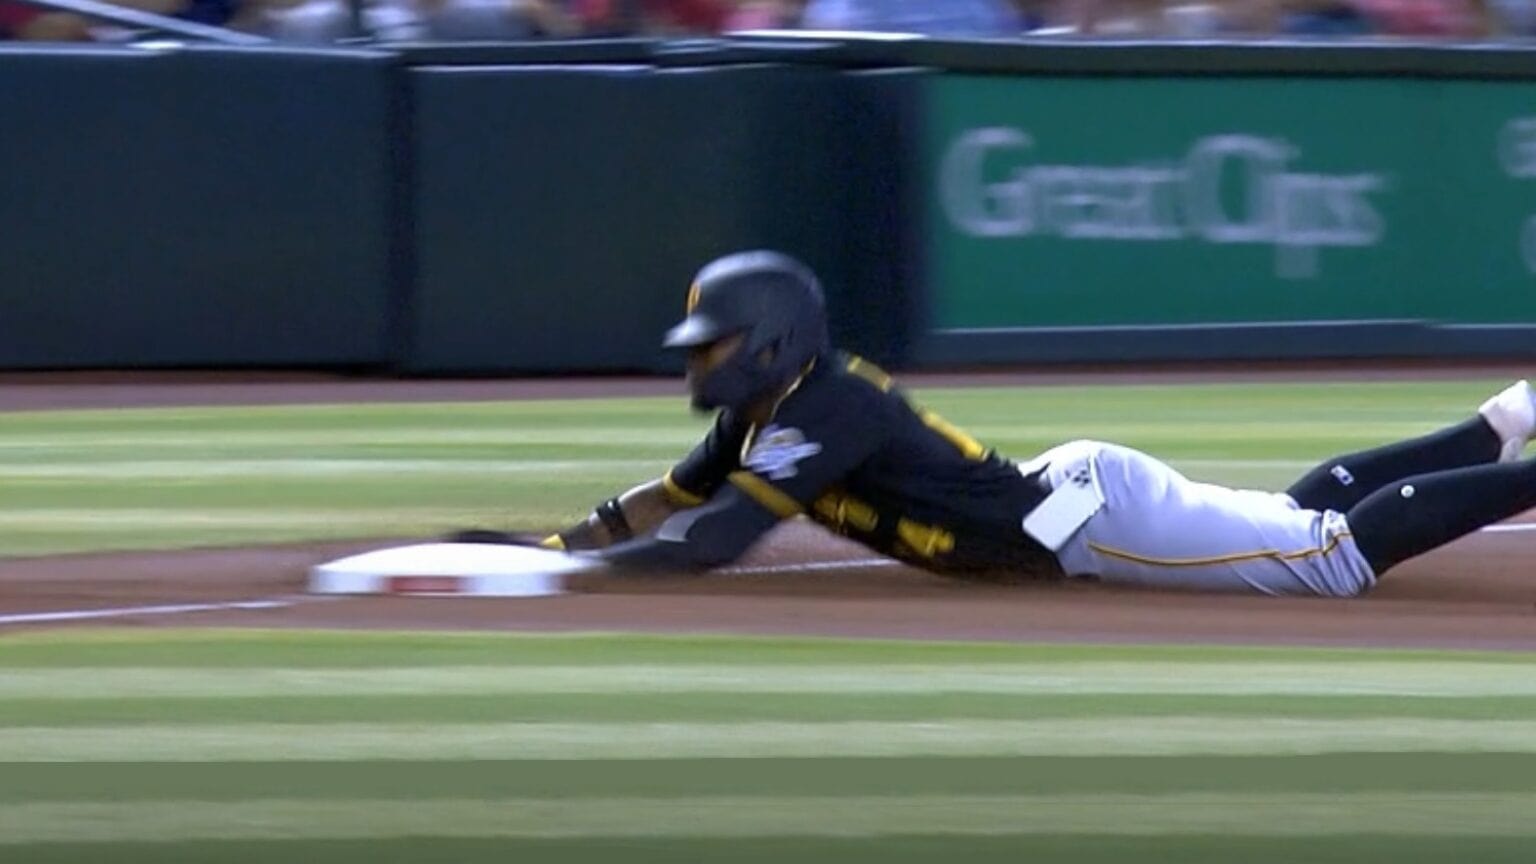 Watch: Pirates infielder slides into third, iPhone slides out of his pocket